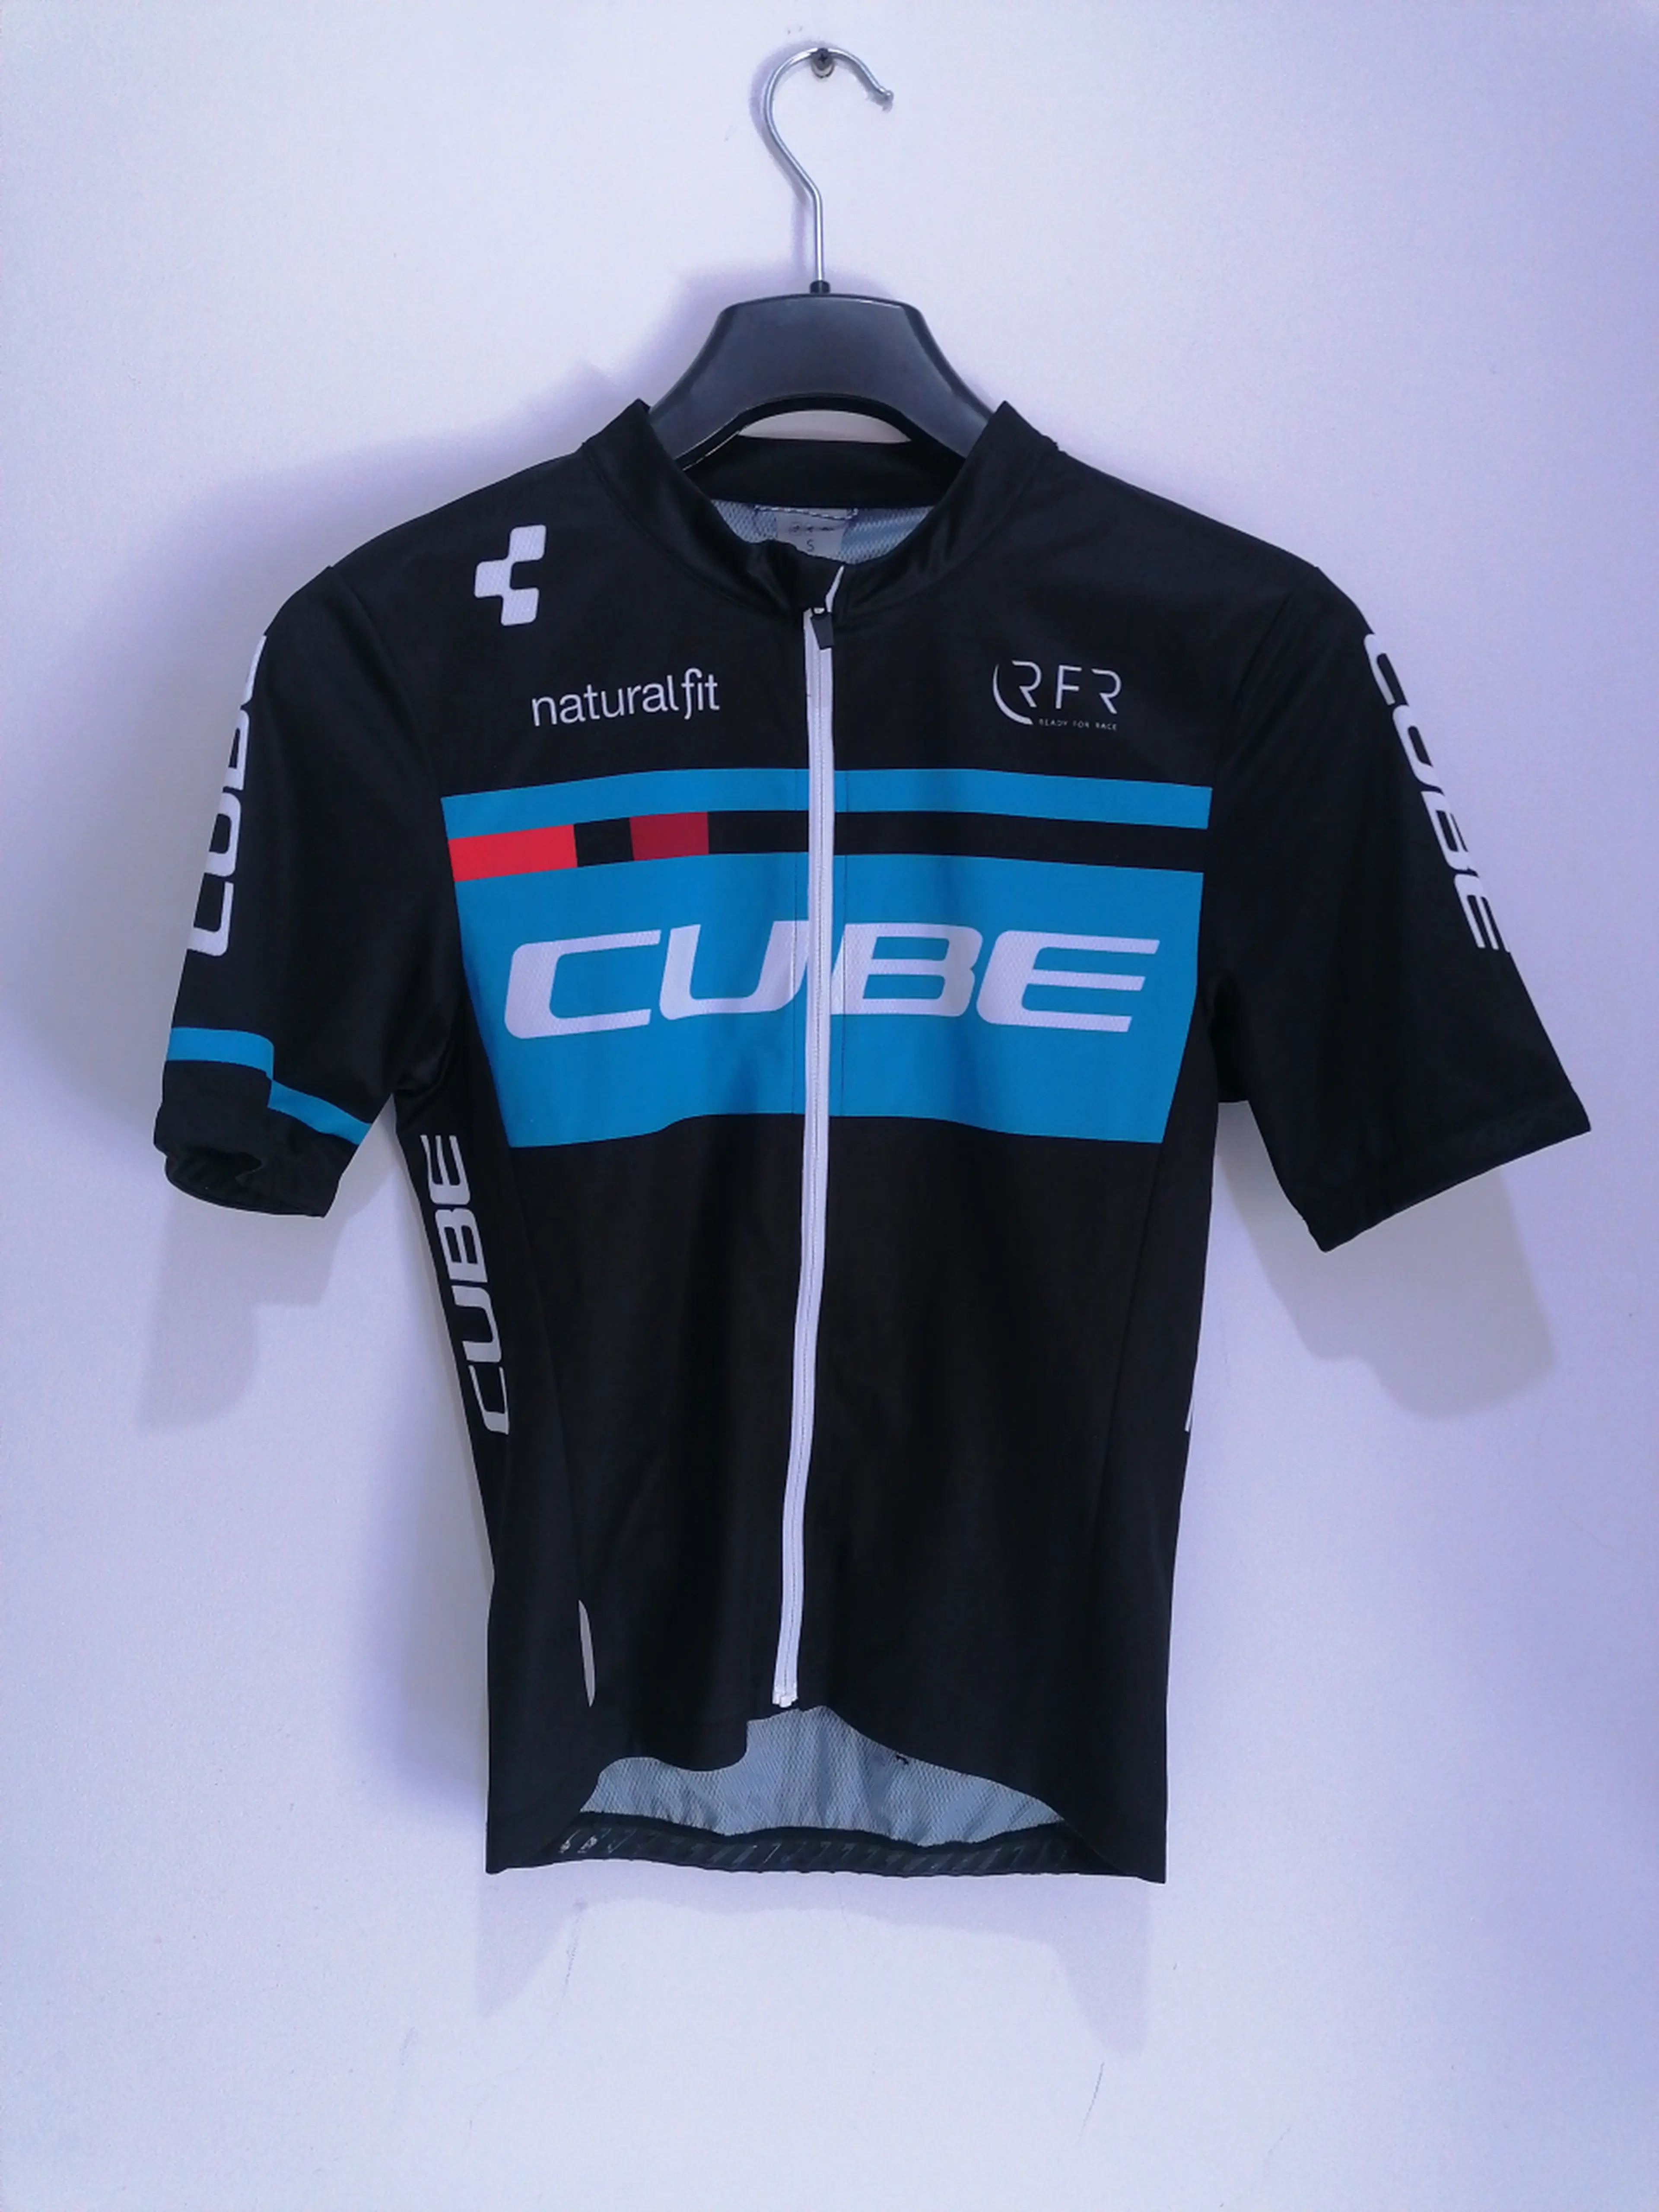 Image Cube Team Cycling 93 size S